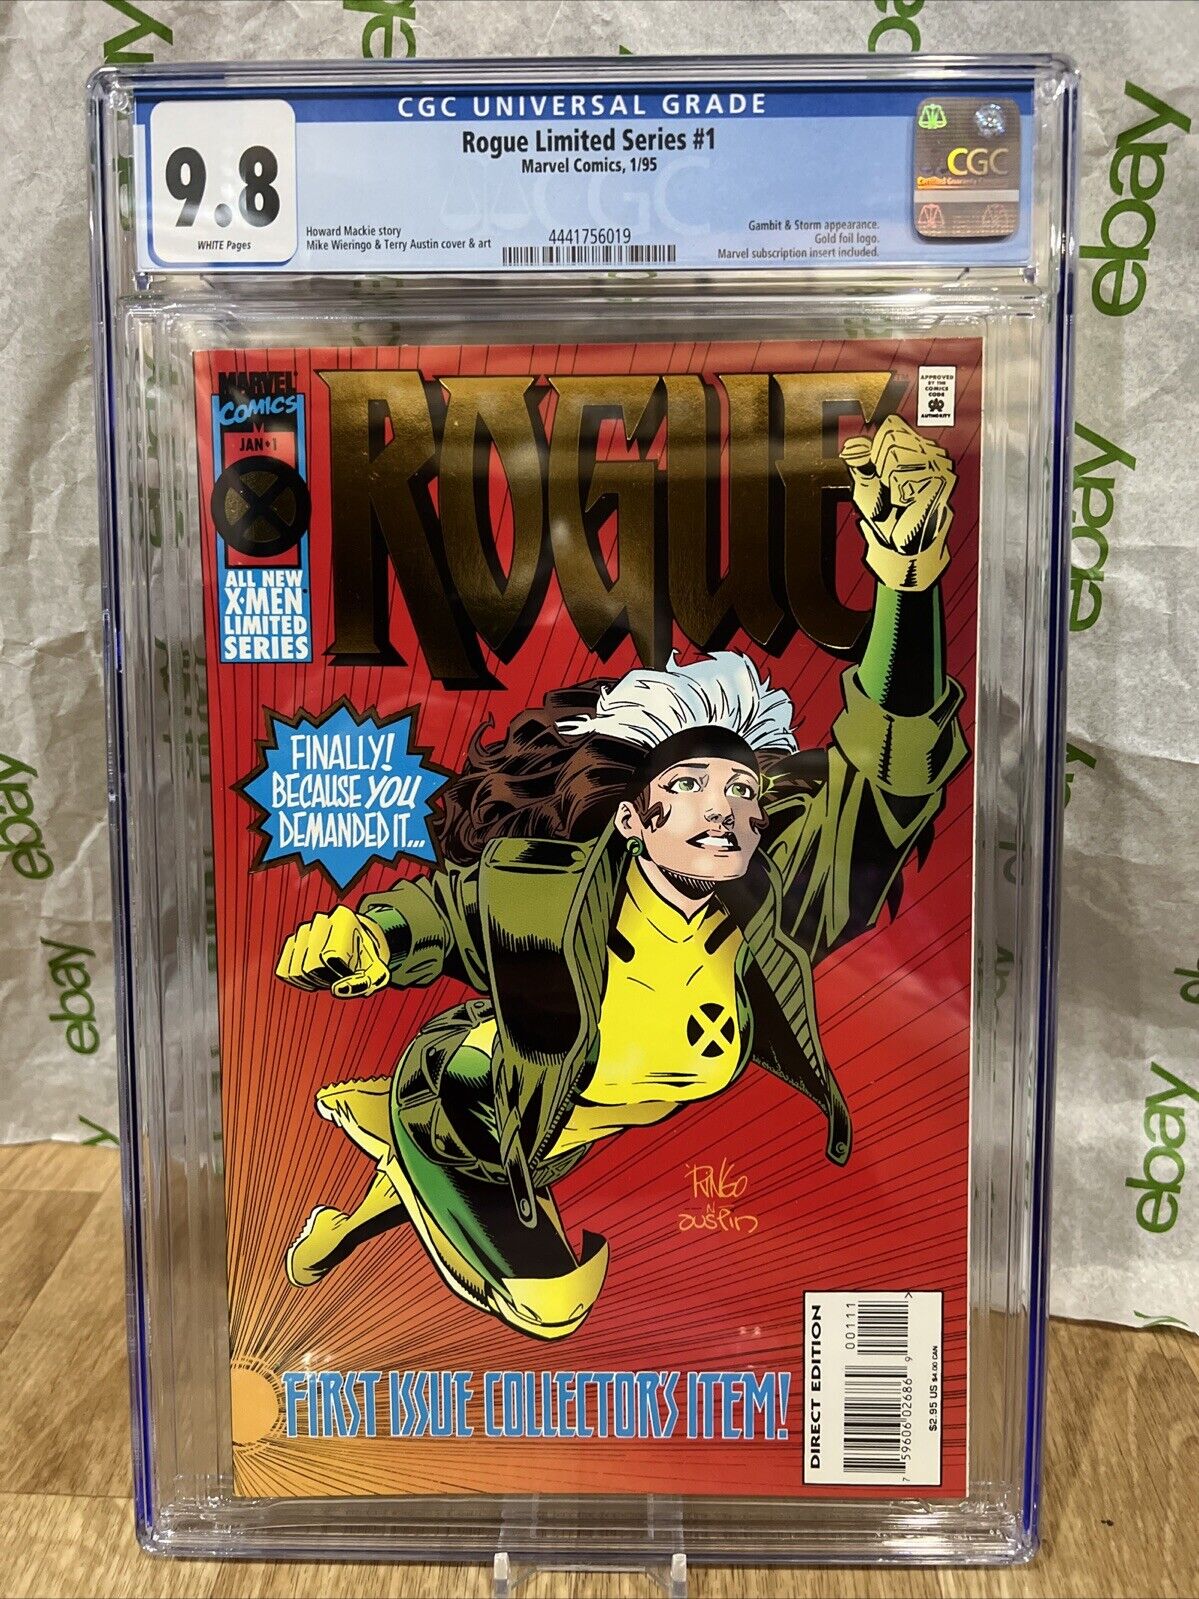 Rogue Limited Series #1 CGC 9.8 Gambit & Storm Appearance 1995 X-Men, Gold Foil